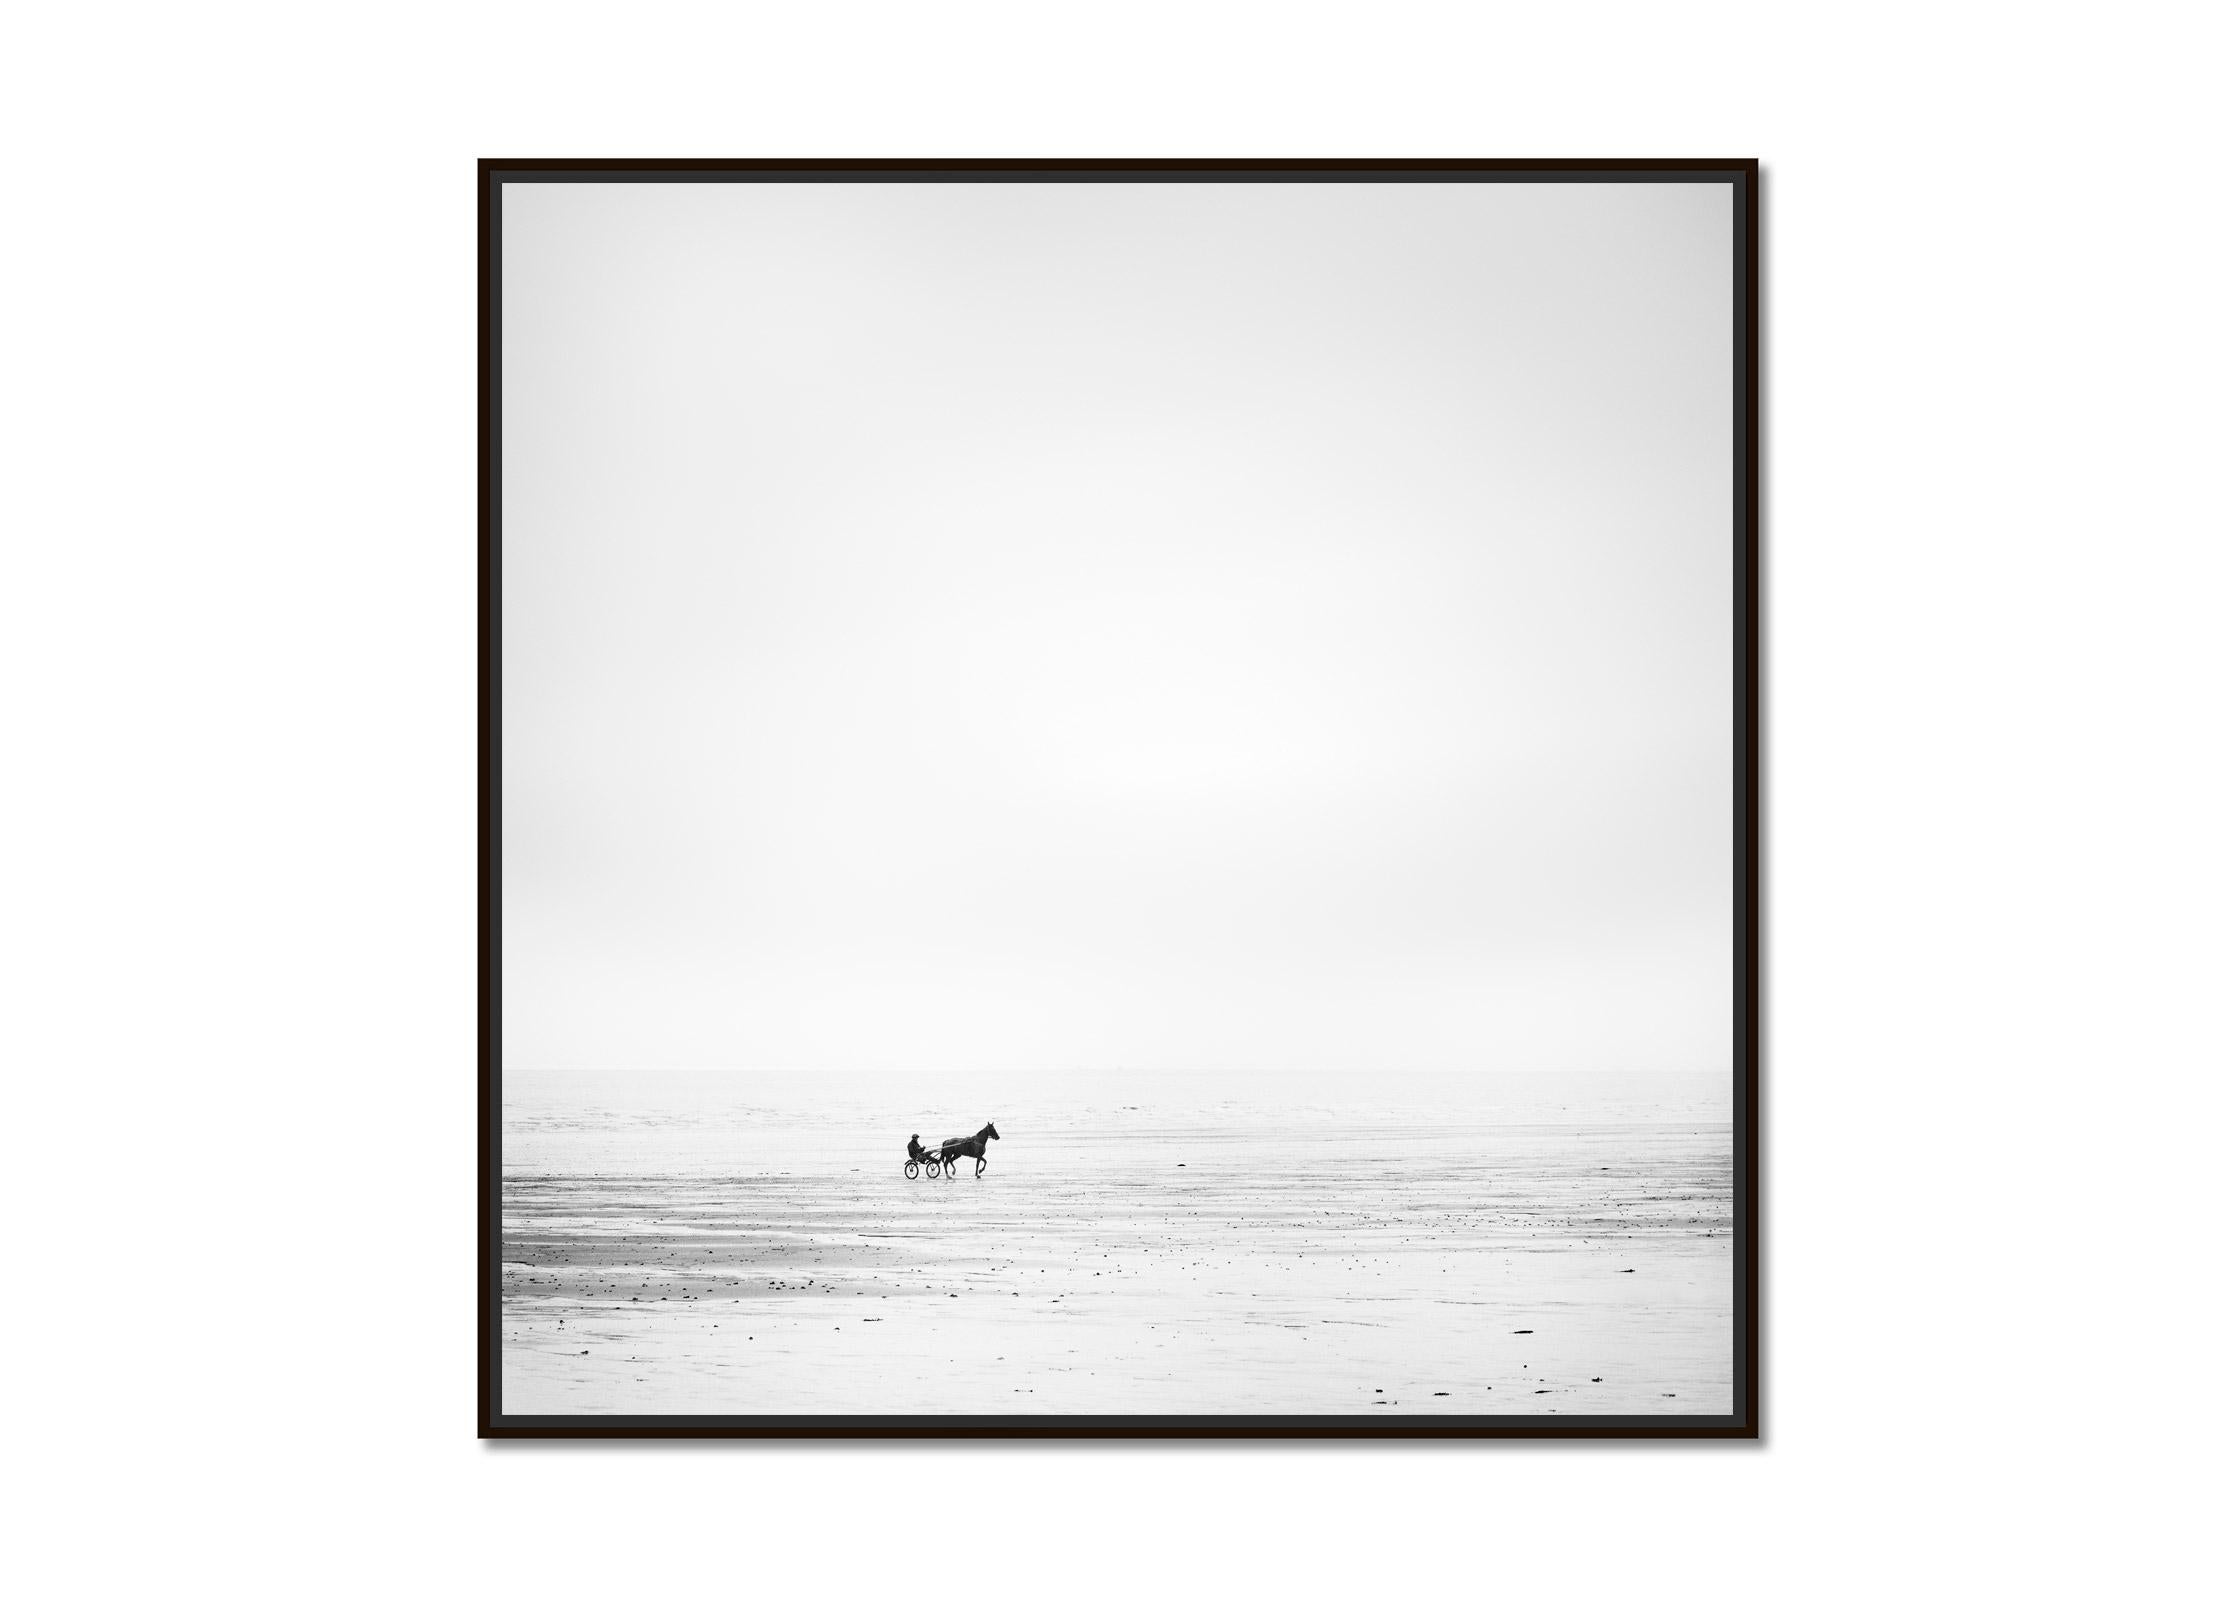 Harness Racing lonely beach horse minimalist black white landscape photography - Photograph by Gerald Berghammer